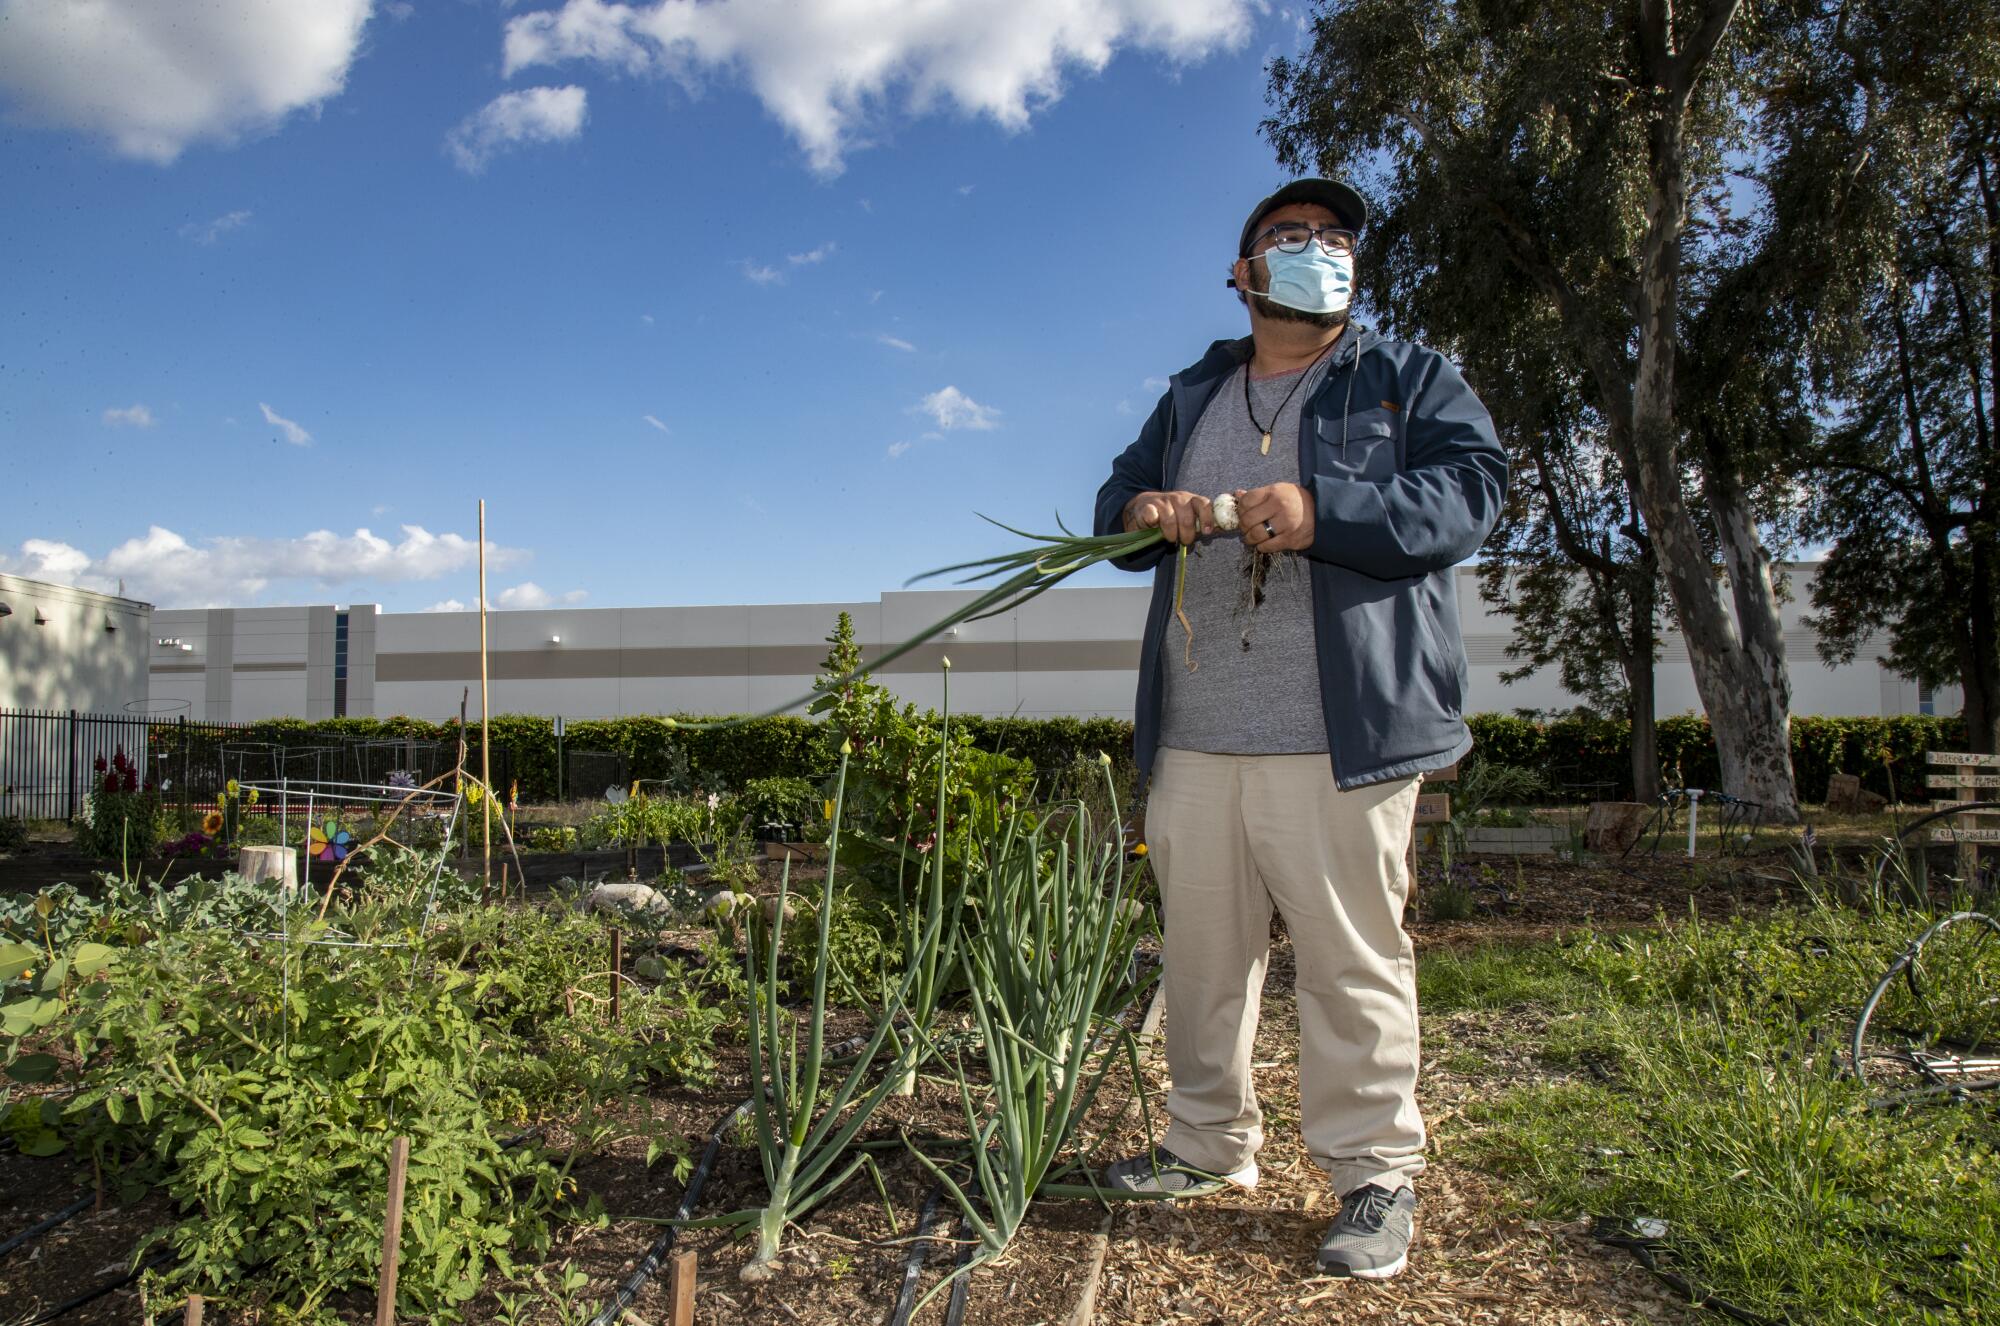 With a giant warehouse in the background, Jorge Heredia of San Bernardino spends time in his vegetable patch